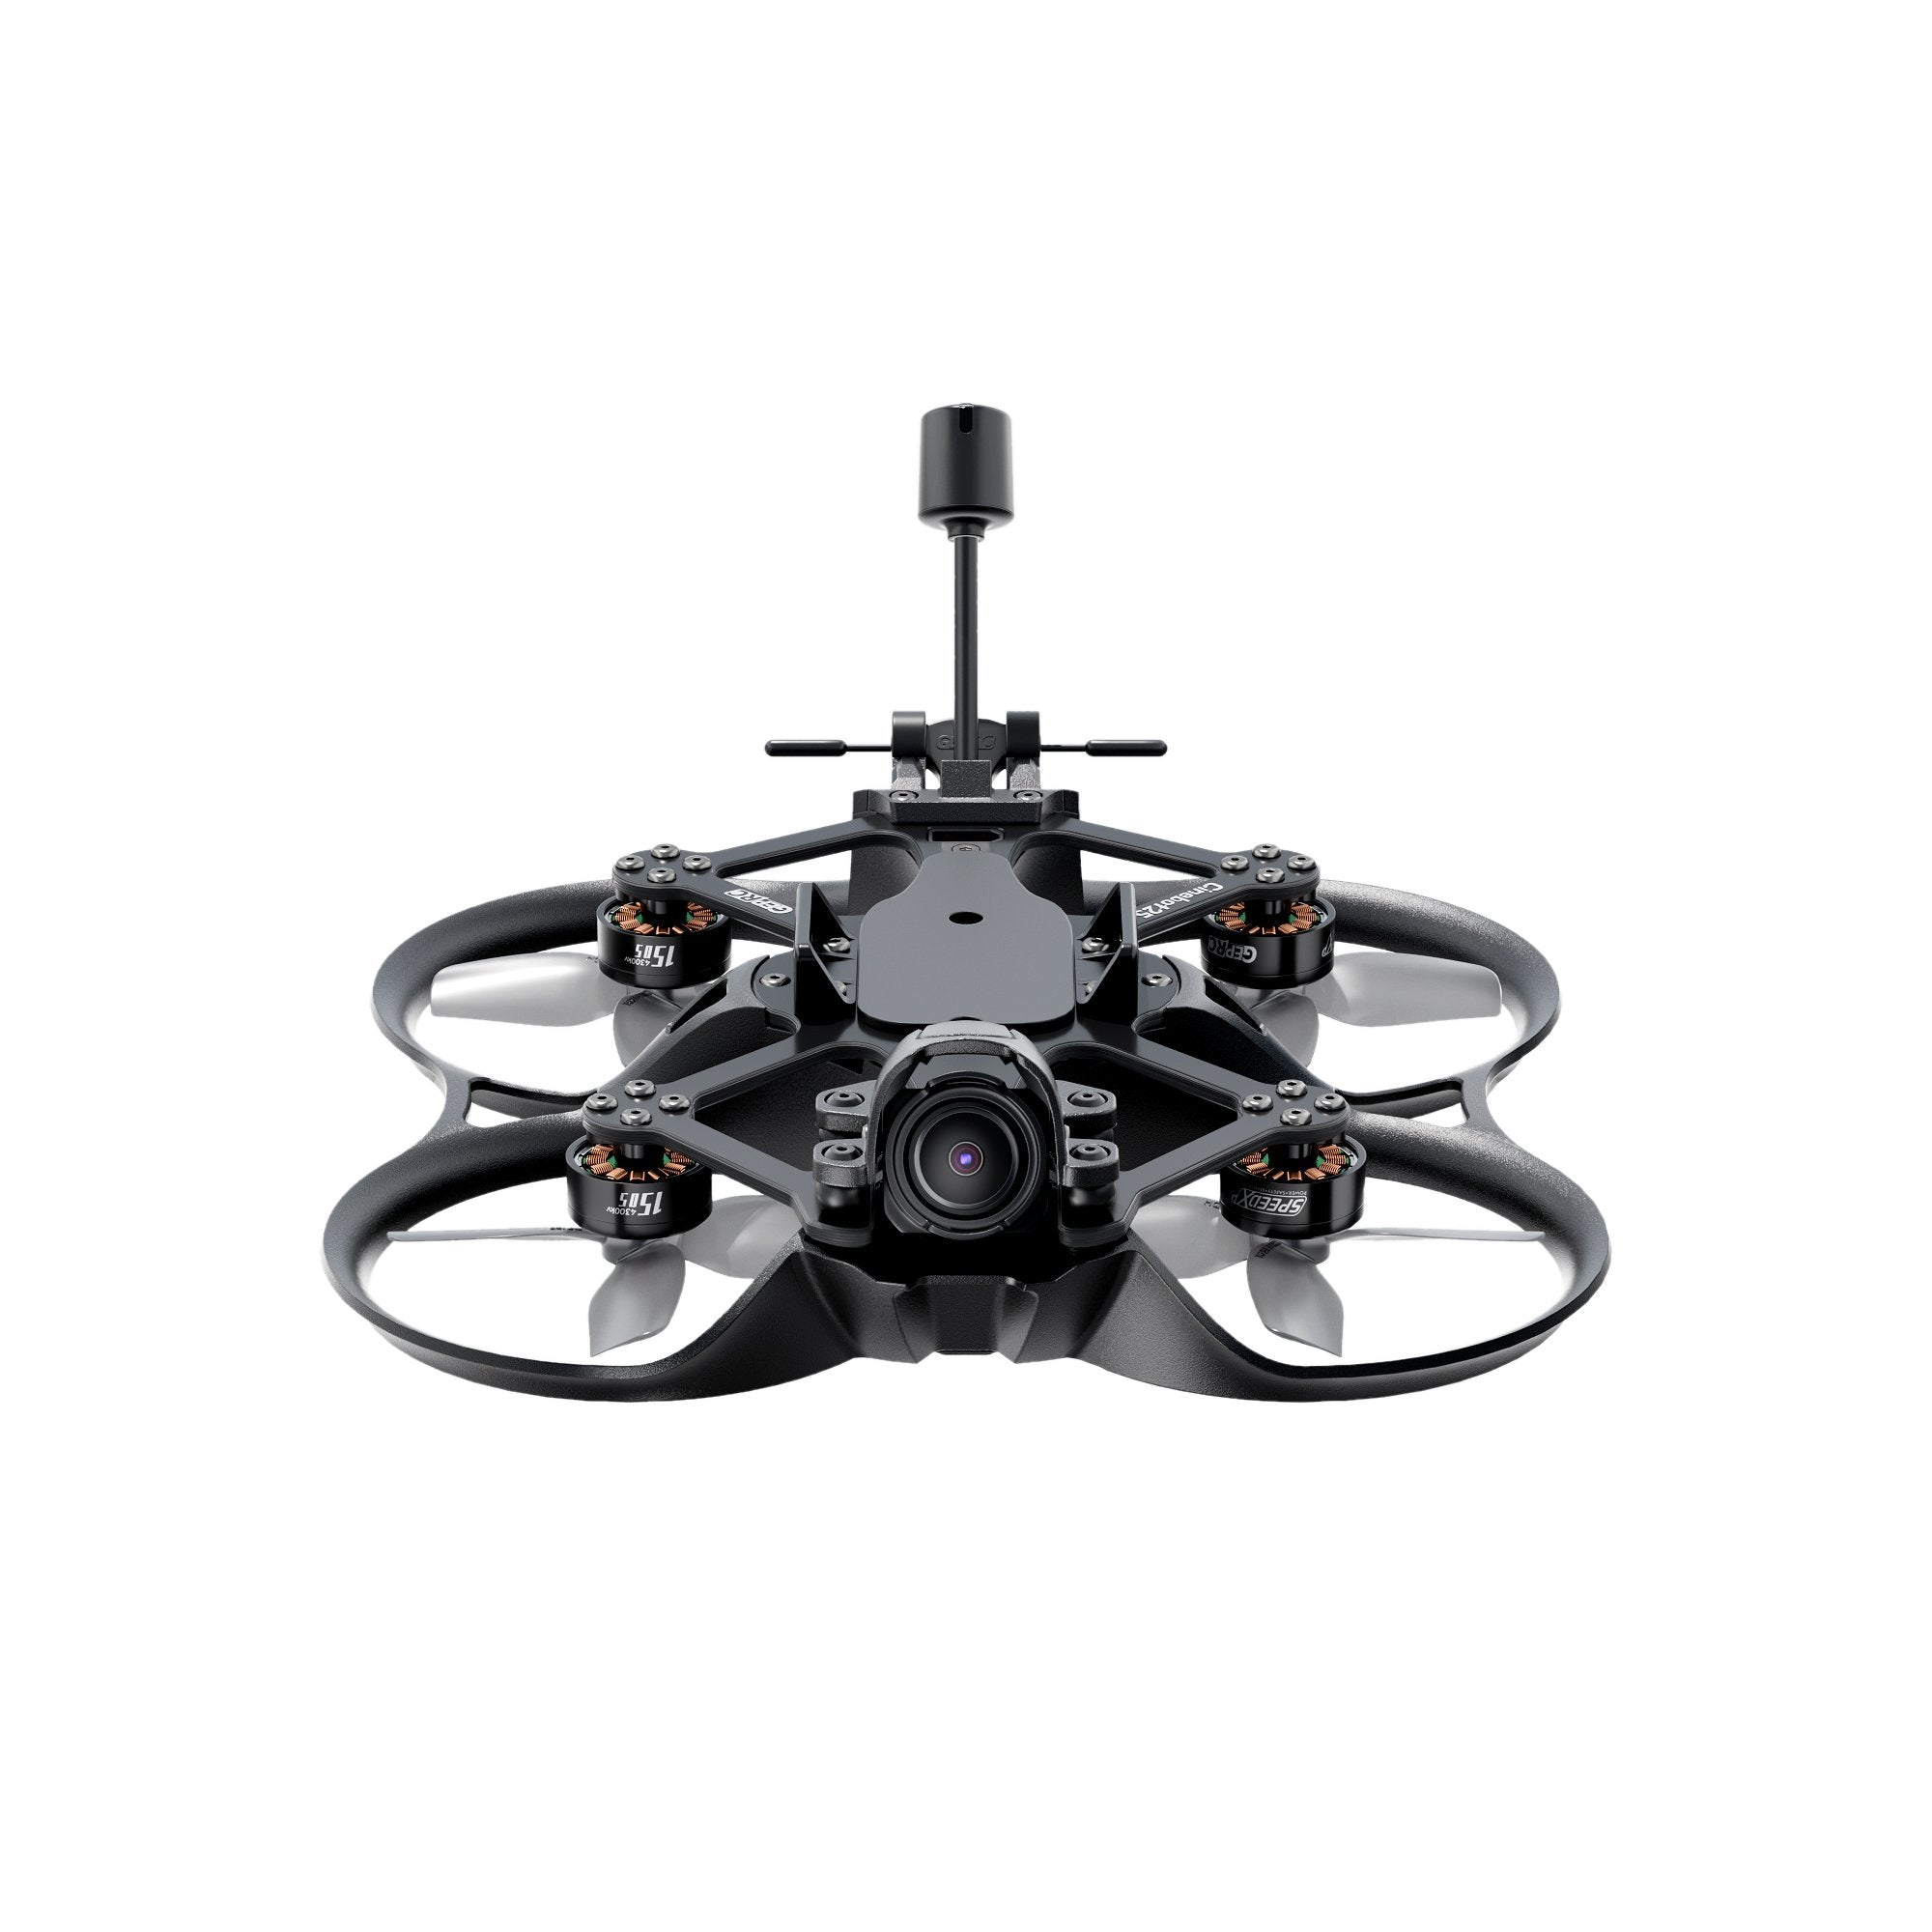 GEPRC Cinebot25 S HD O3 Quadcopter